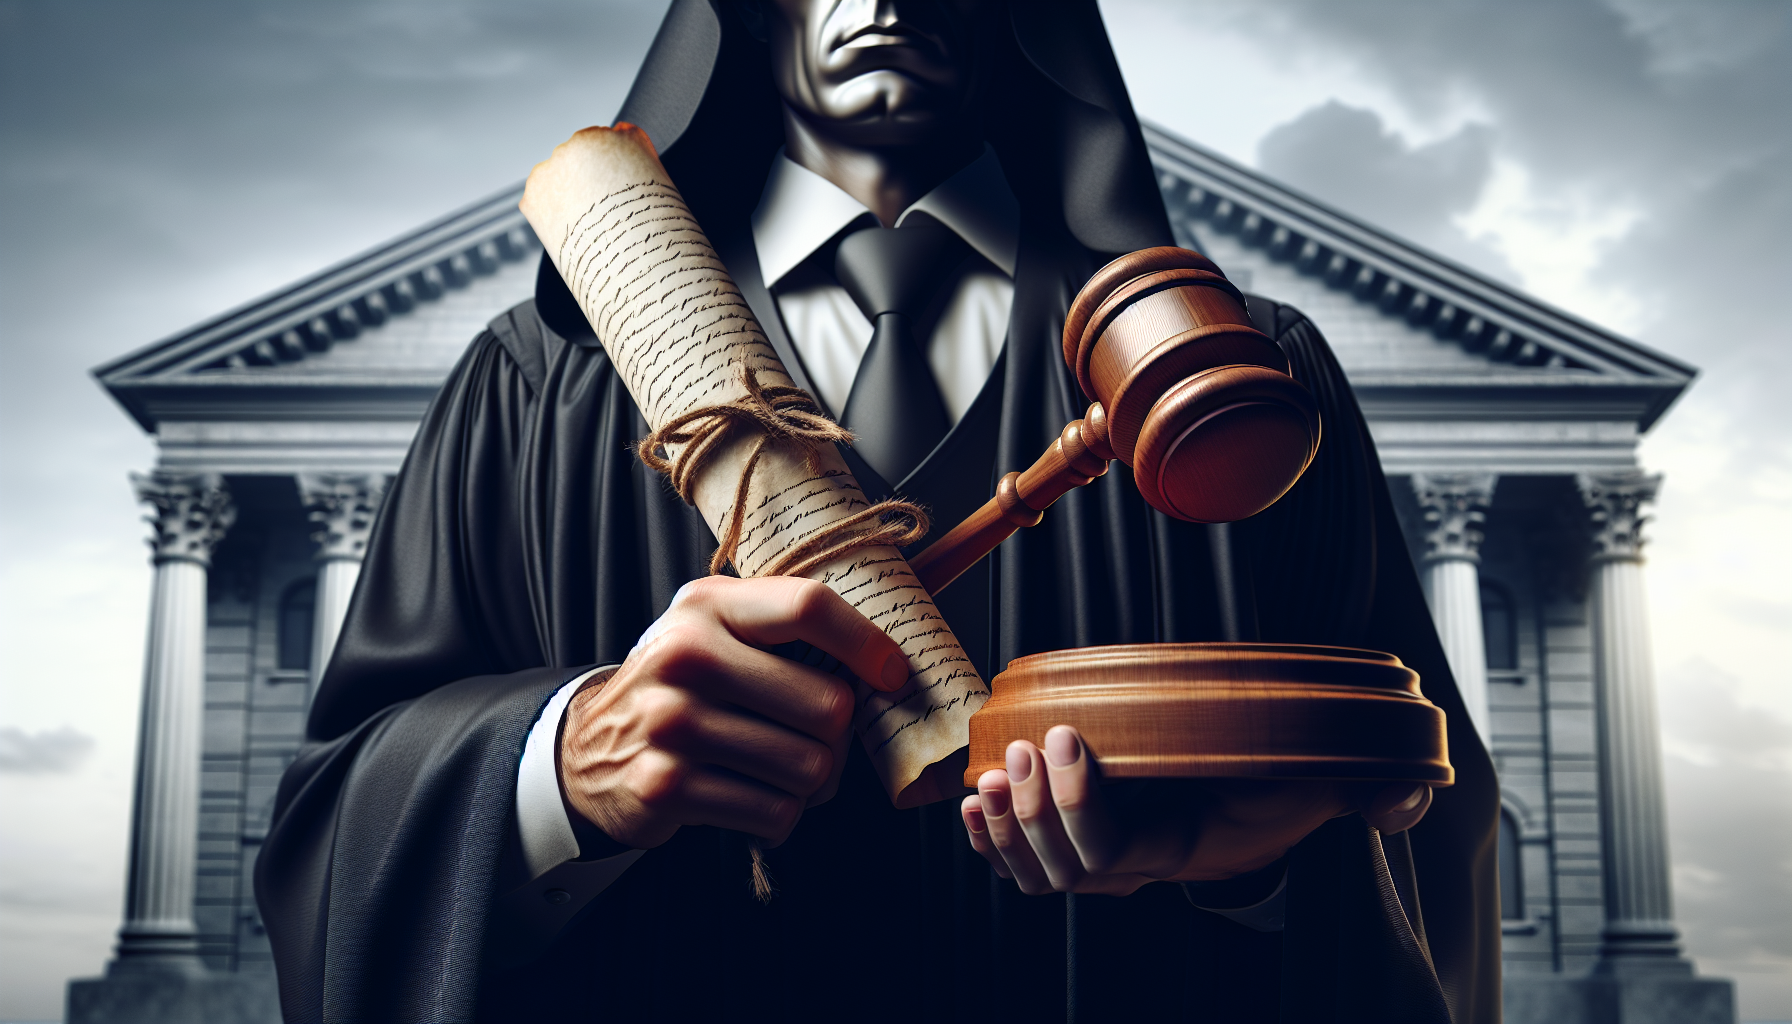 Illustration of a person holding a legal document and a gavel symbolizing legal action for anticipatory repudiation